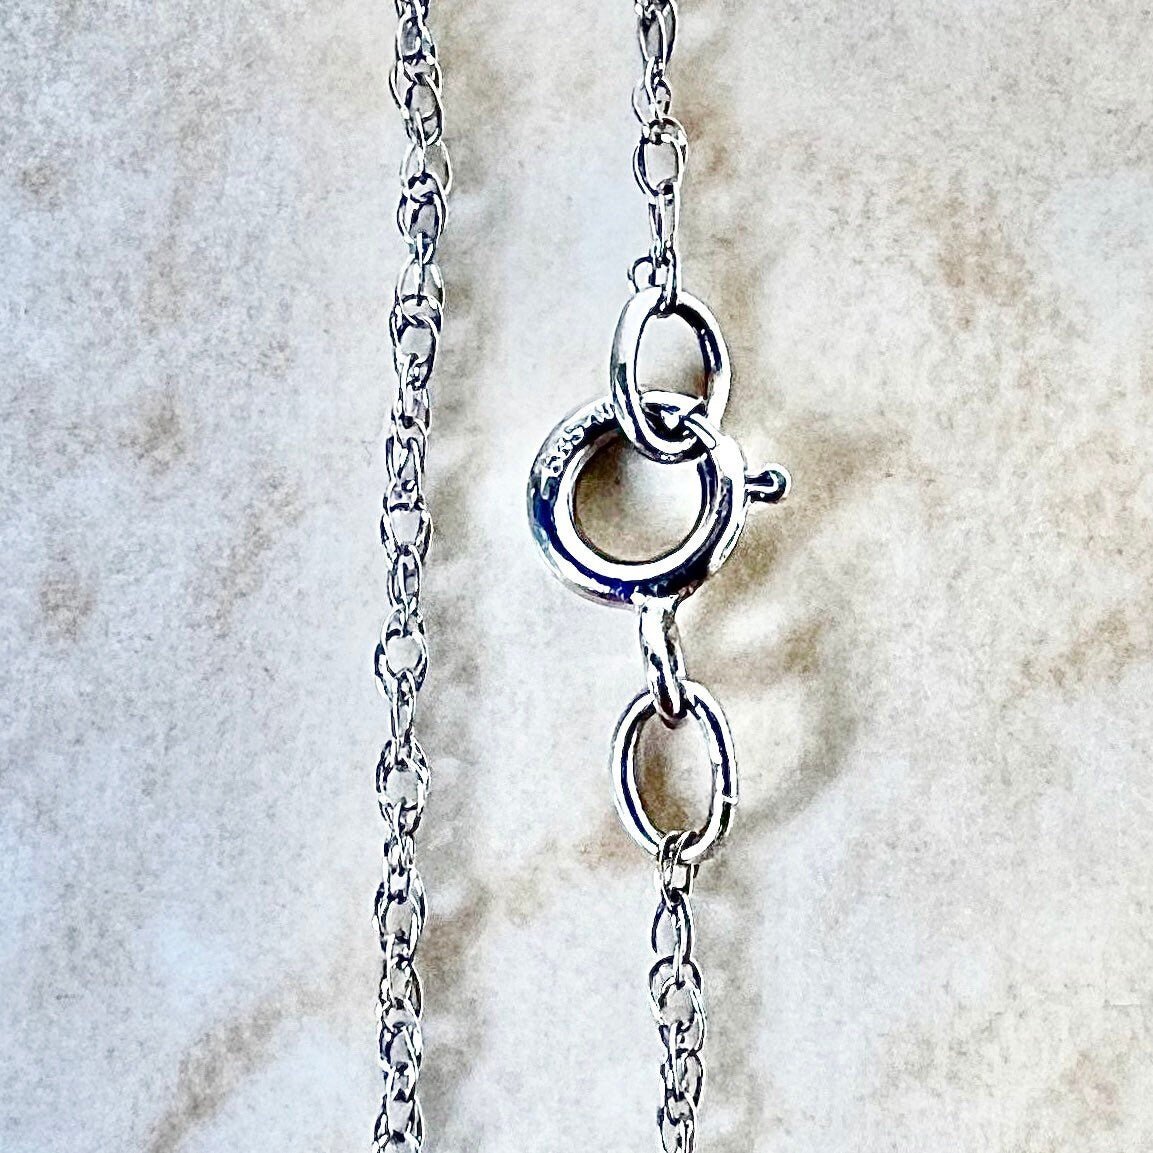 Vintage 14K White Gold Rope Chain - 16.5” Gold Chain - White Gold Pendant Necklace - Birthday Gift For Her - Holiday Gift - Jewelry Sale